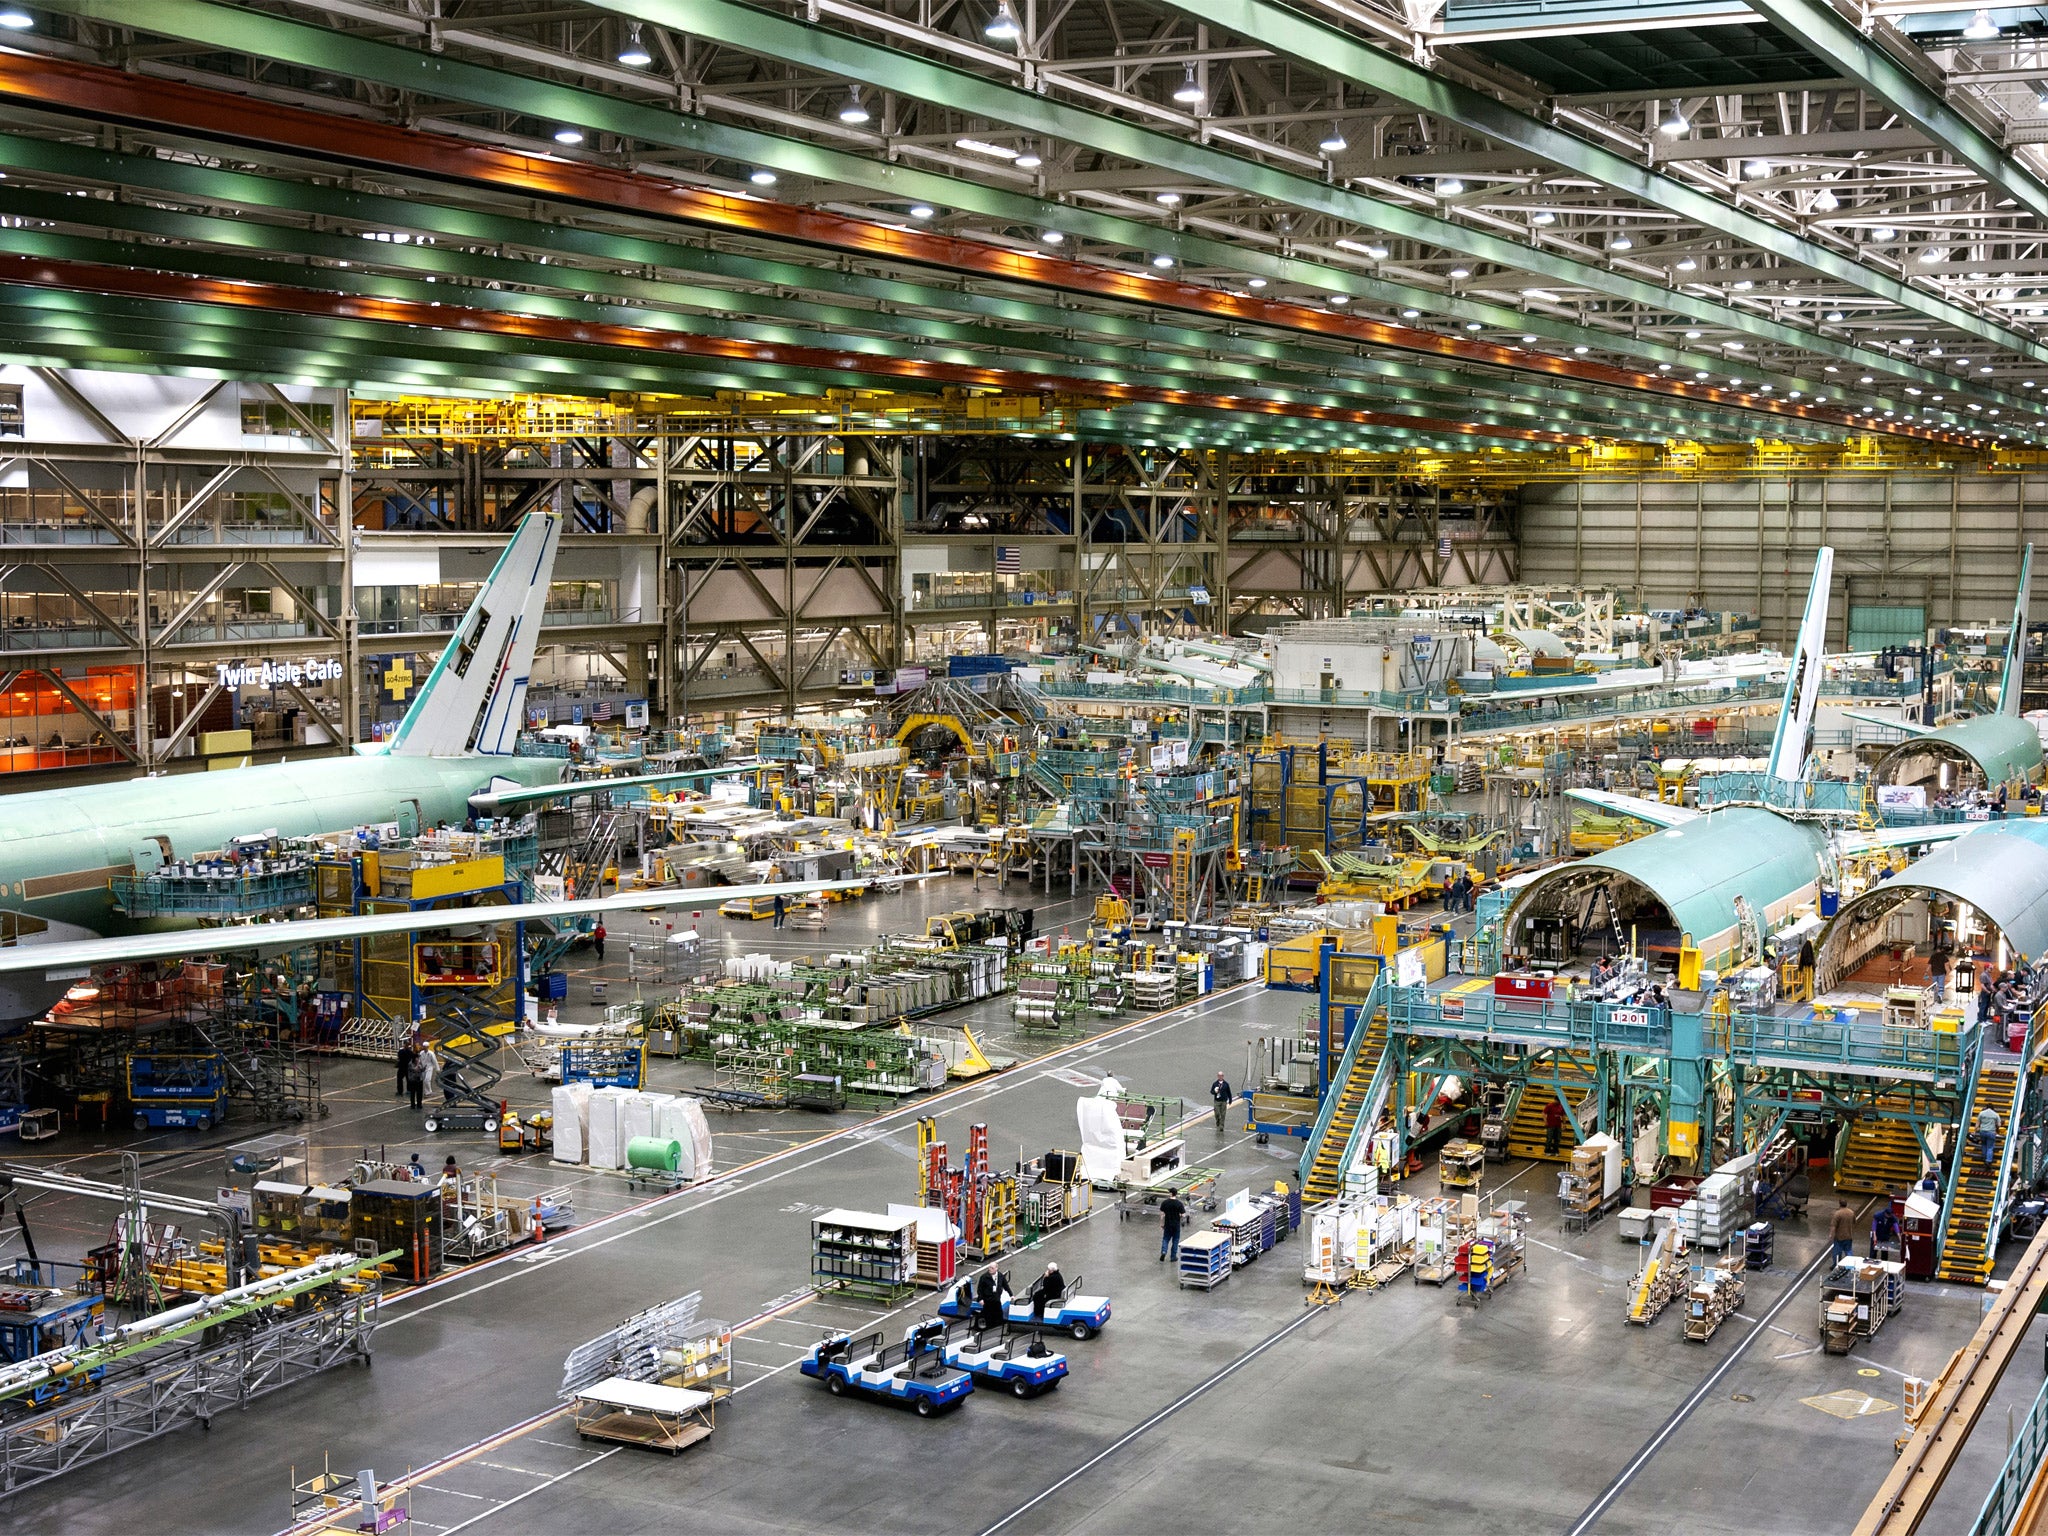 The Everett factory, where Boeing’s planes are assembled, is so vast that rainclouds have appeared near the ceiling